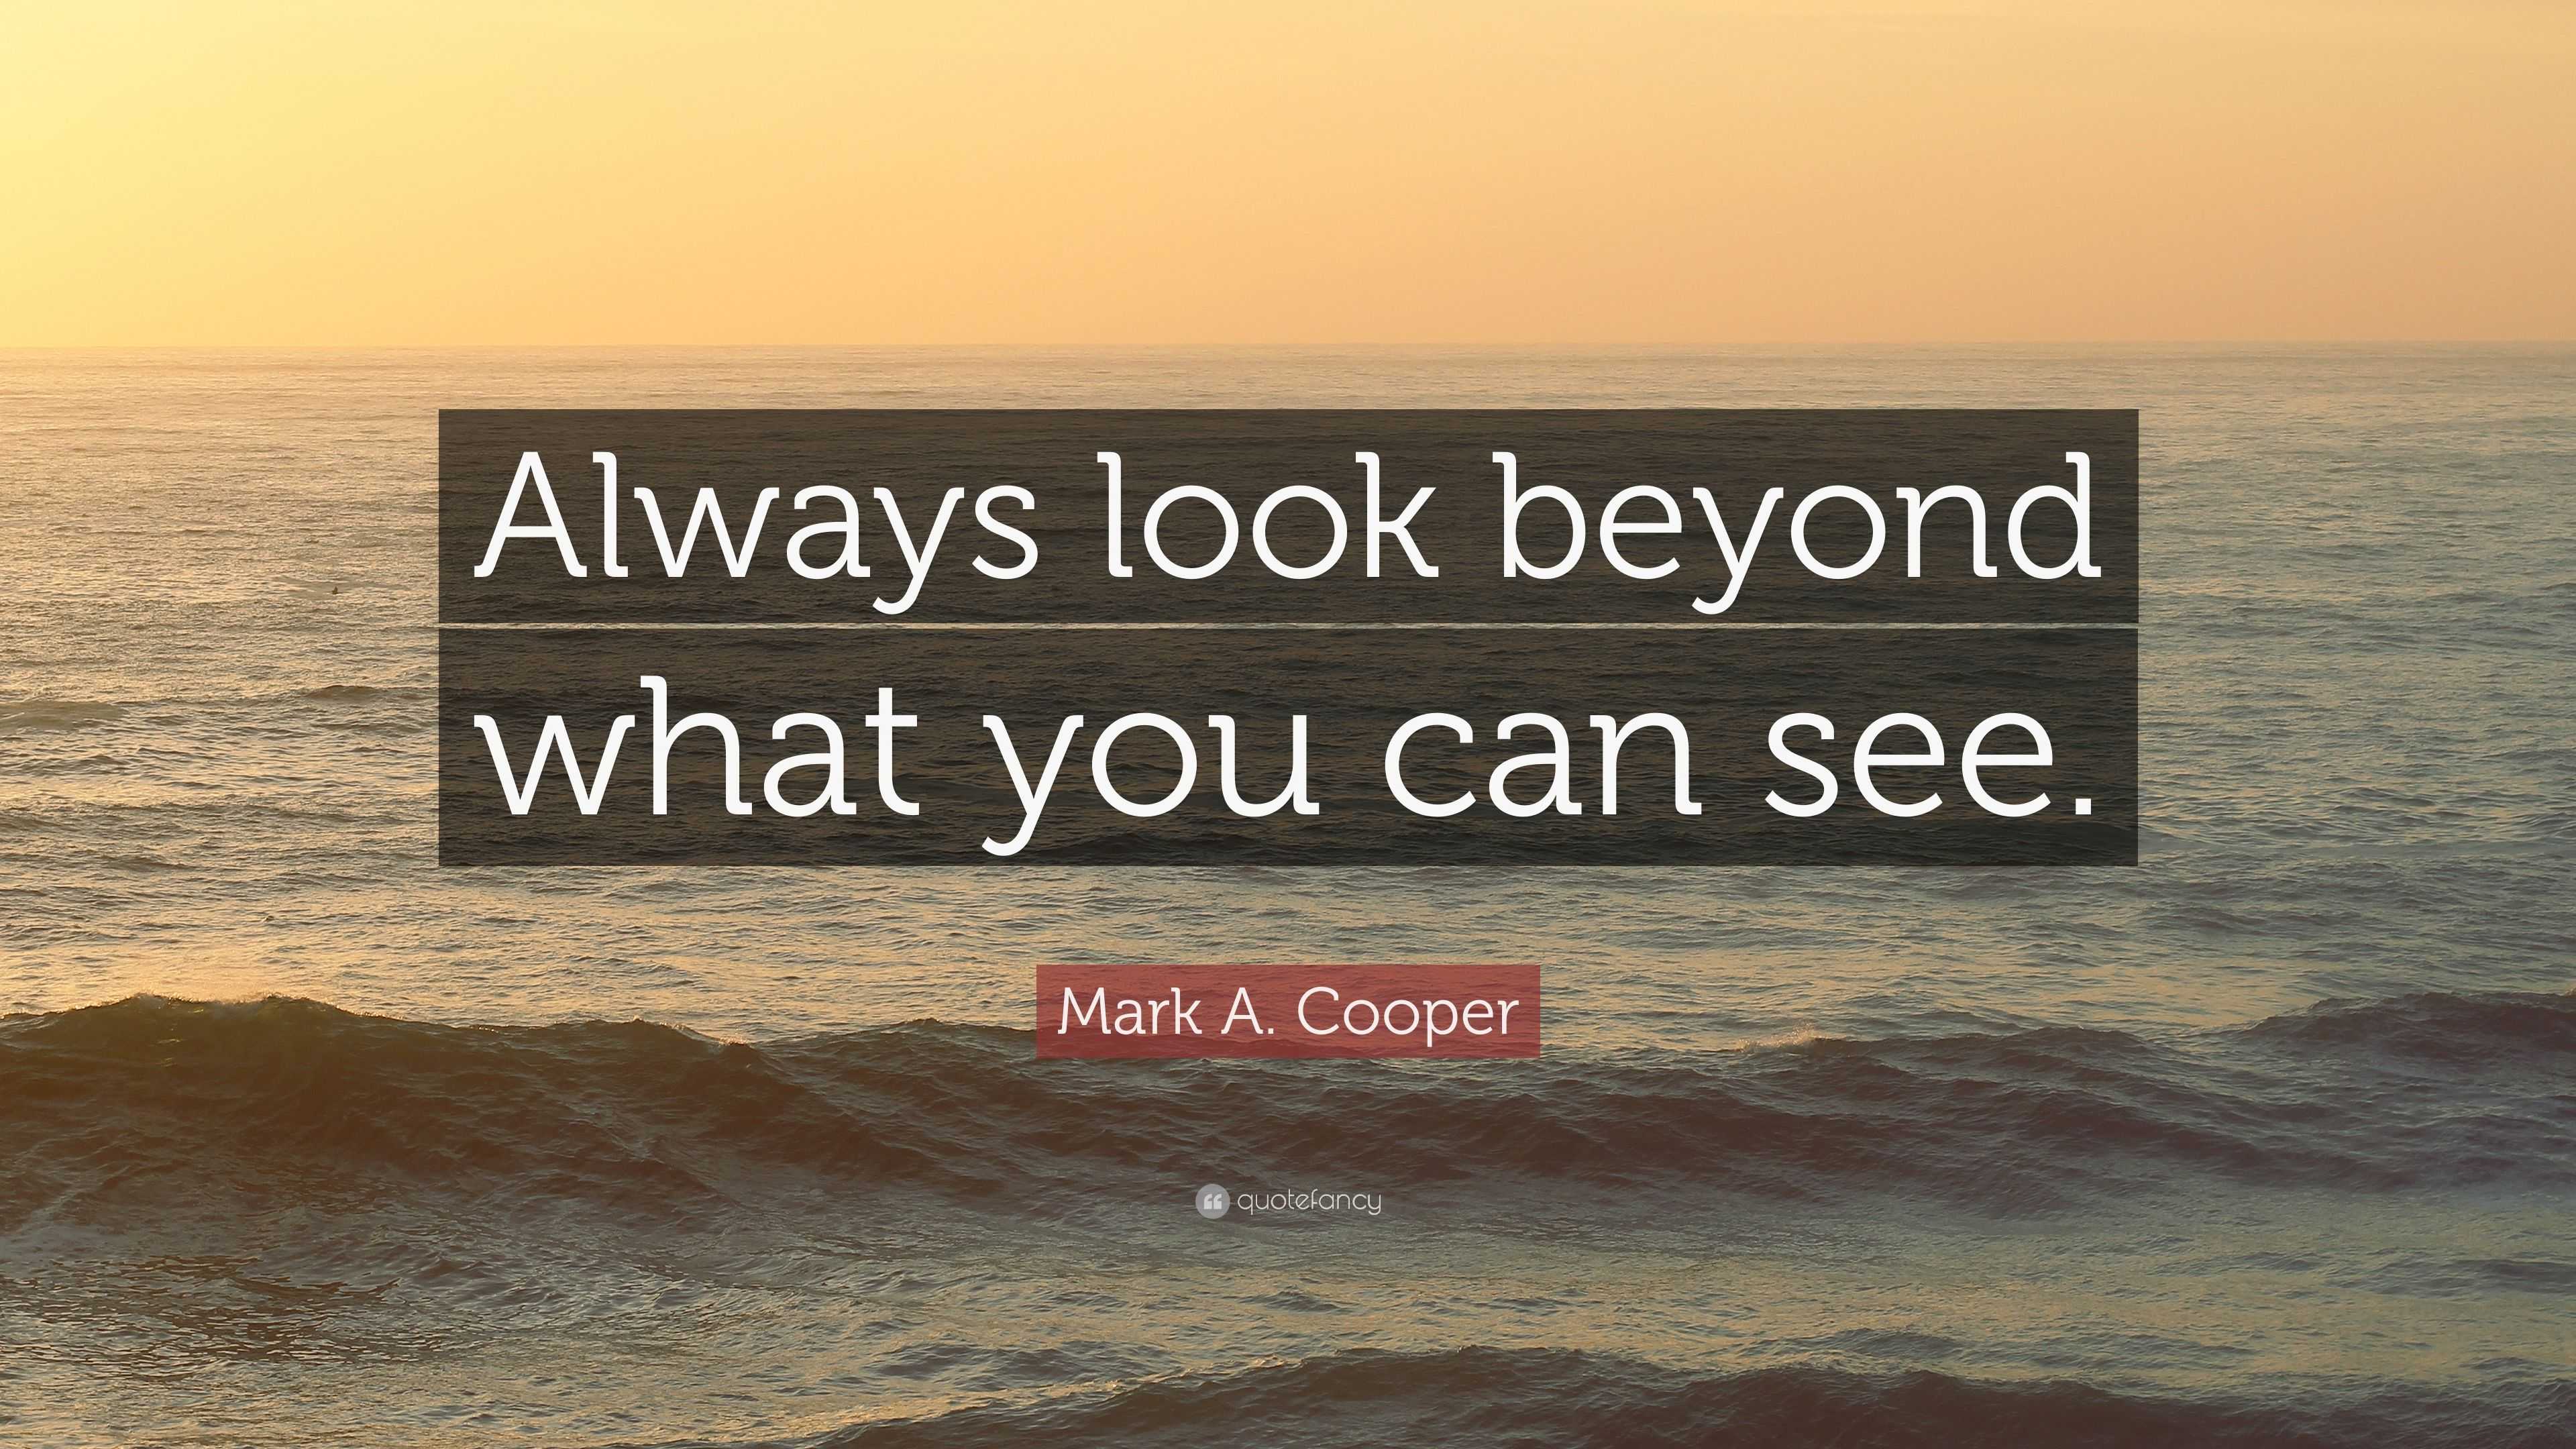 Mark A. Cooper Quote: "Always look beyond what you can see." (12 wallpapers) - Quotefancy